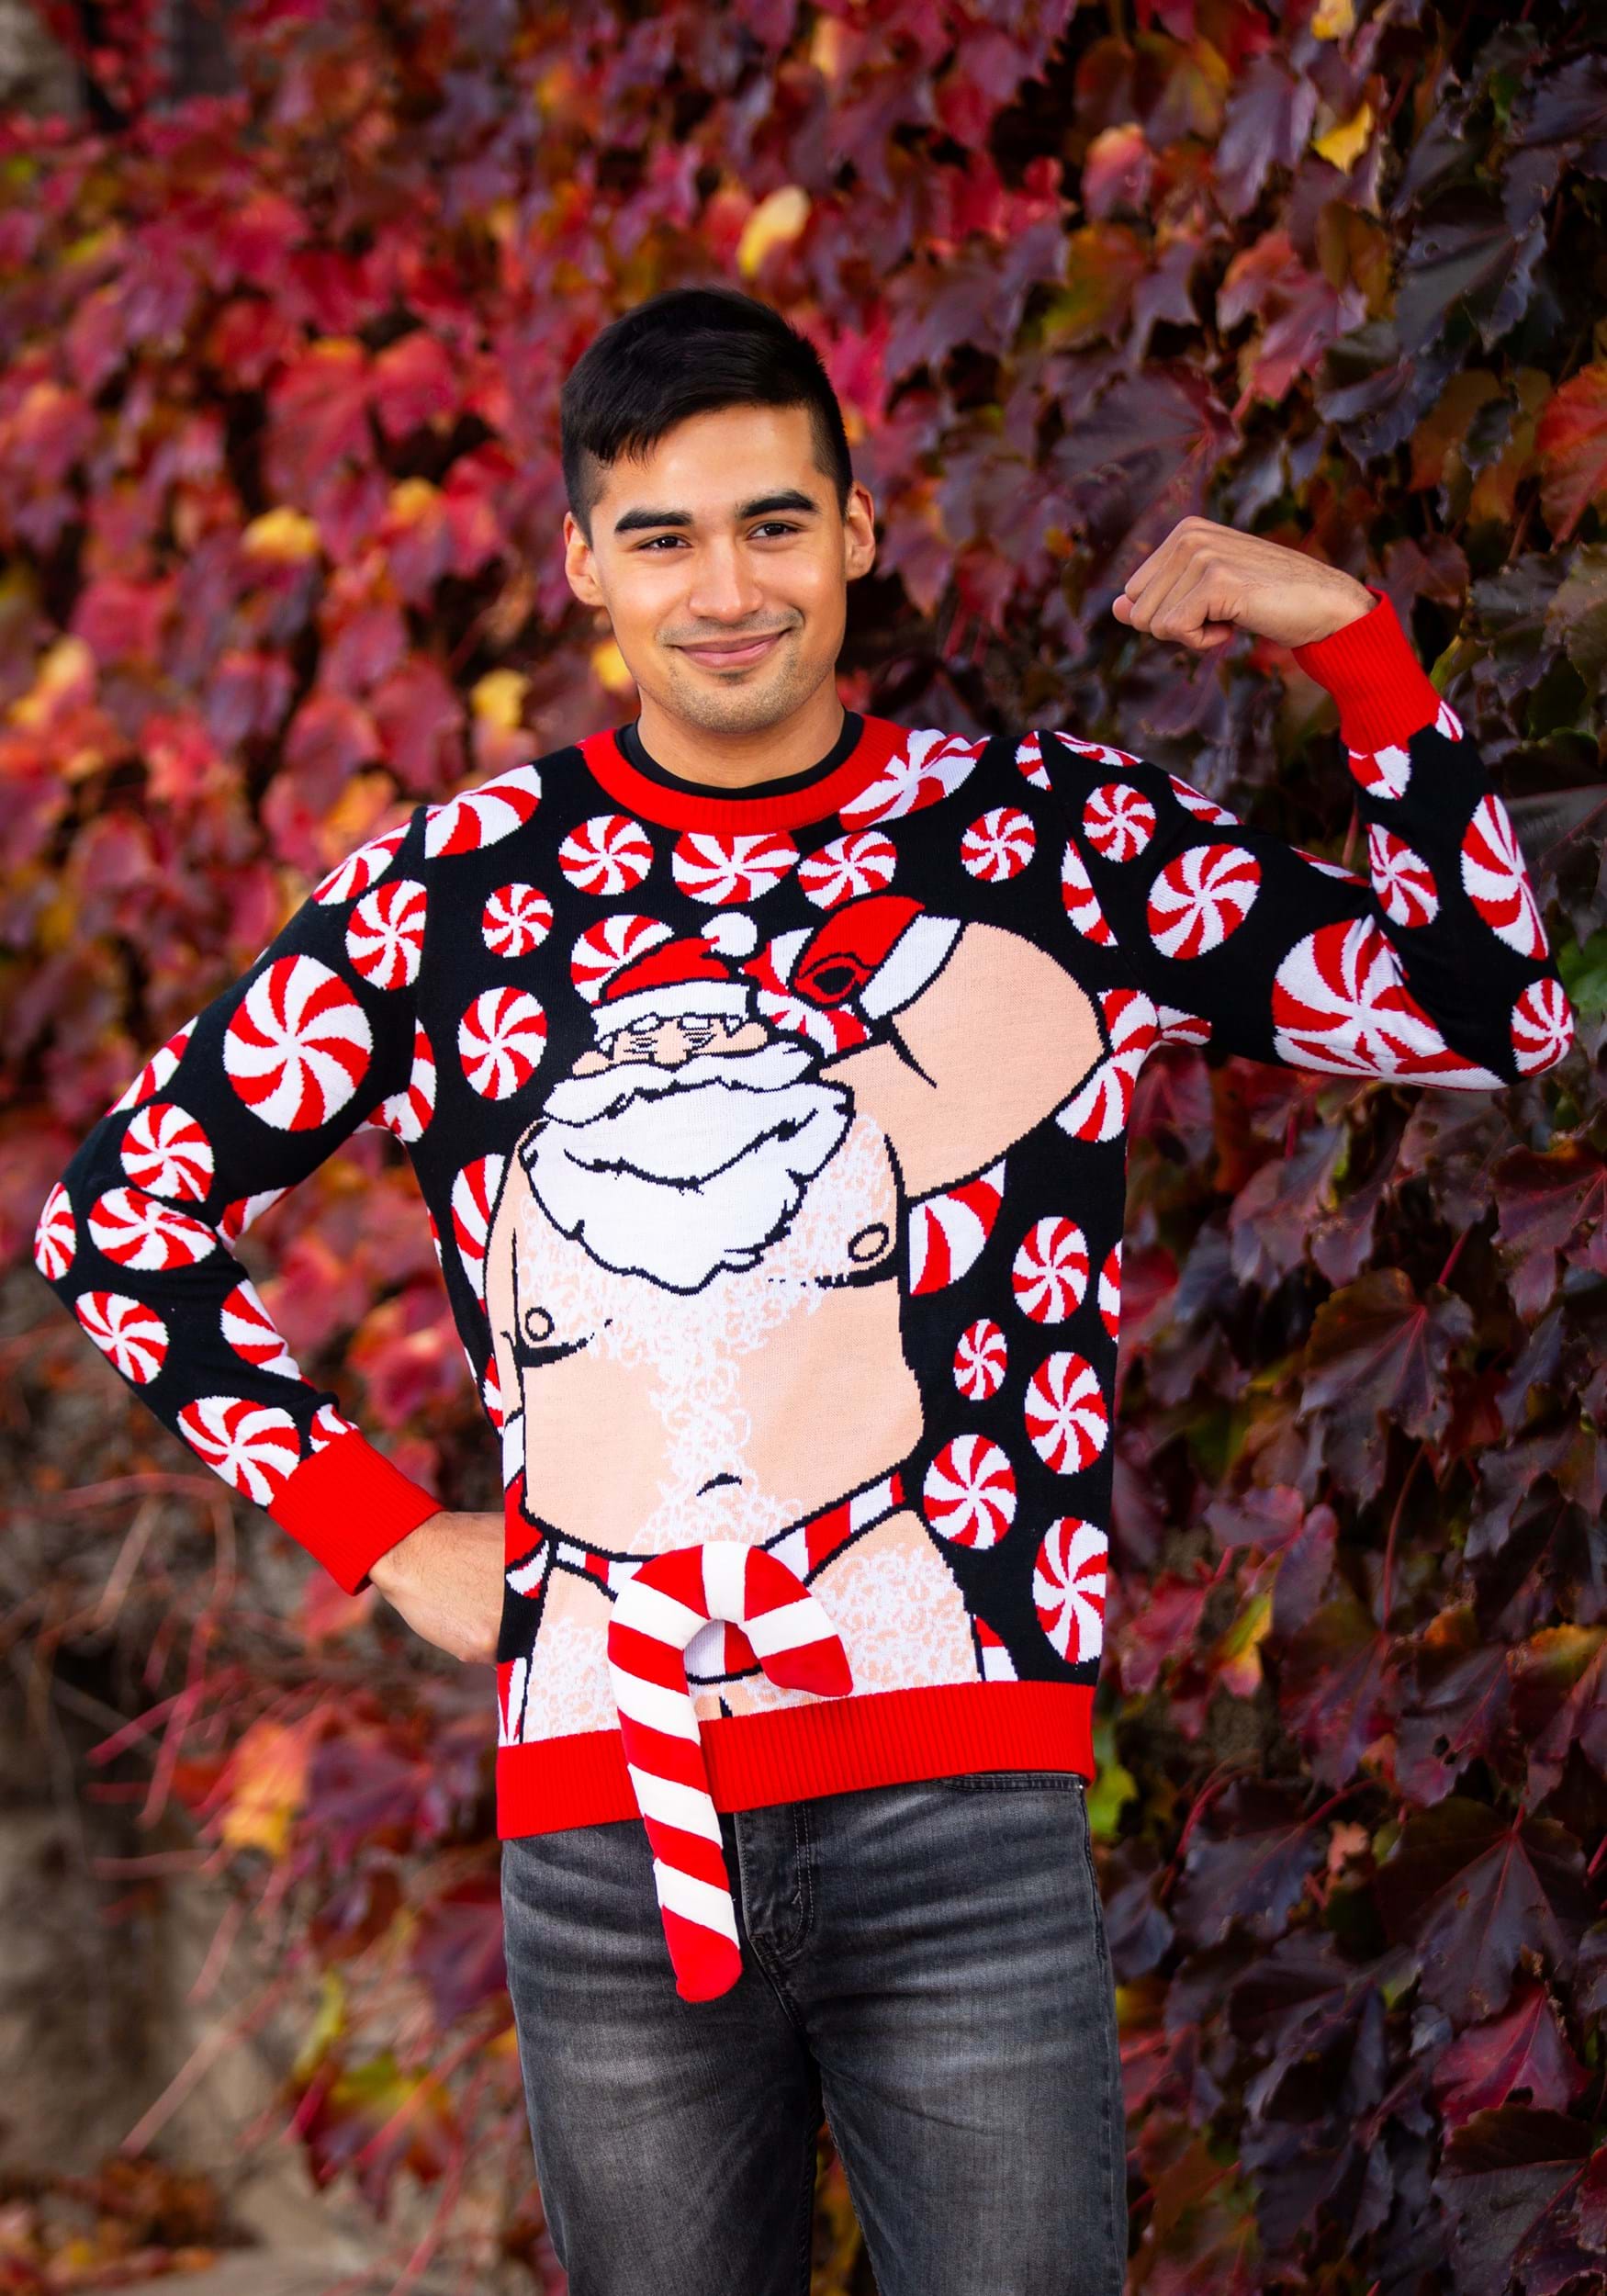 21 Best Ugly Christmas Sweaters in 2022 - Funny Holiday Sweaters